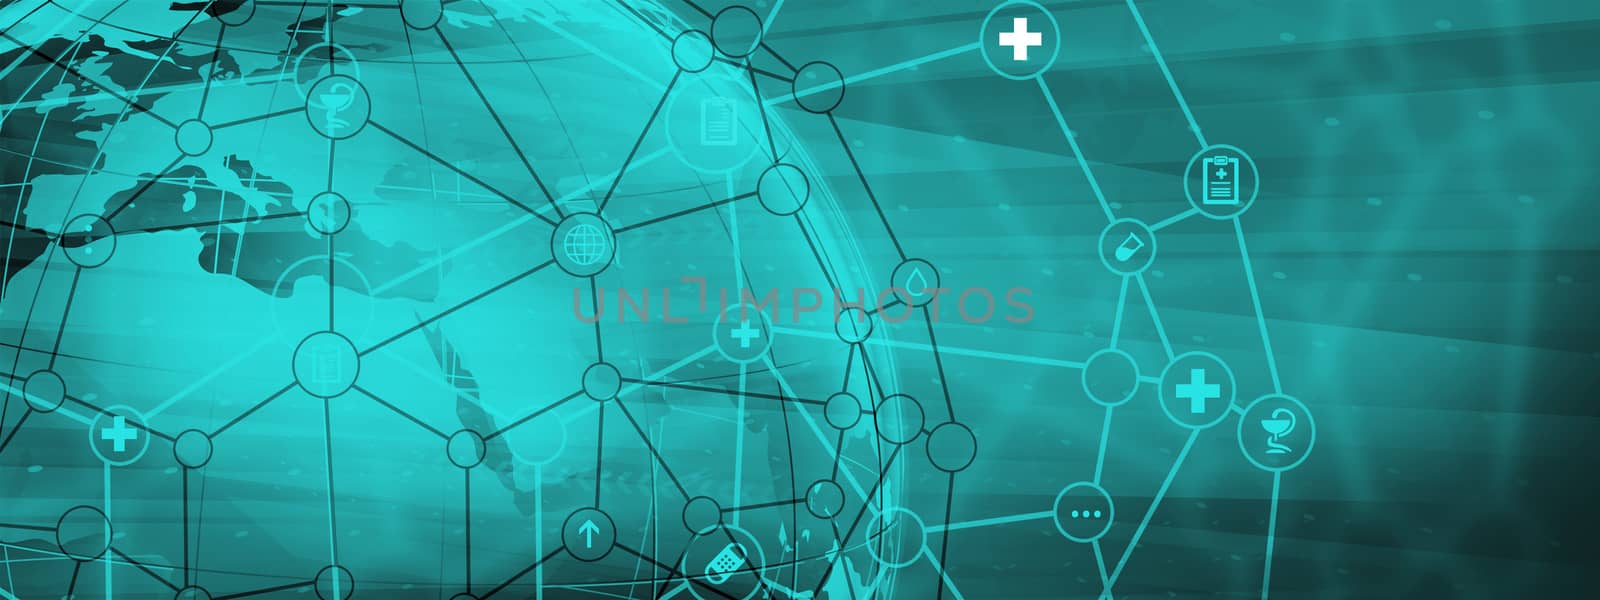 Abstract Worldwide Health Care Background Concept Series by bluemoon1981